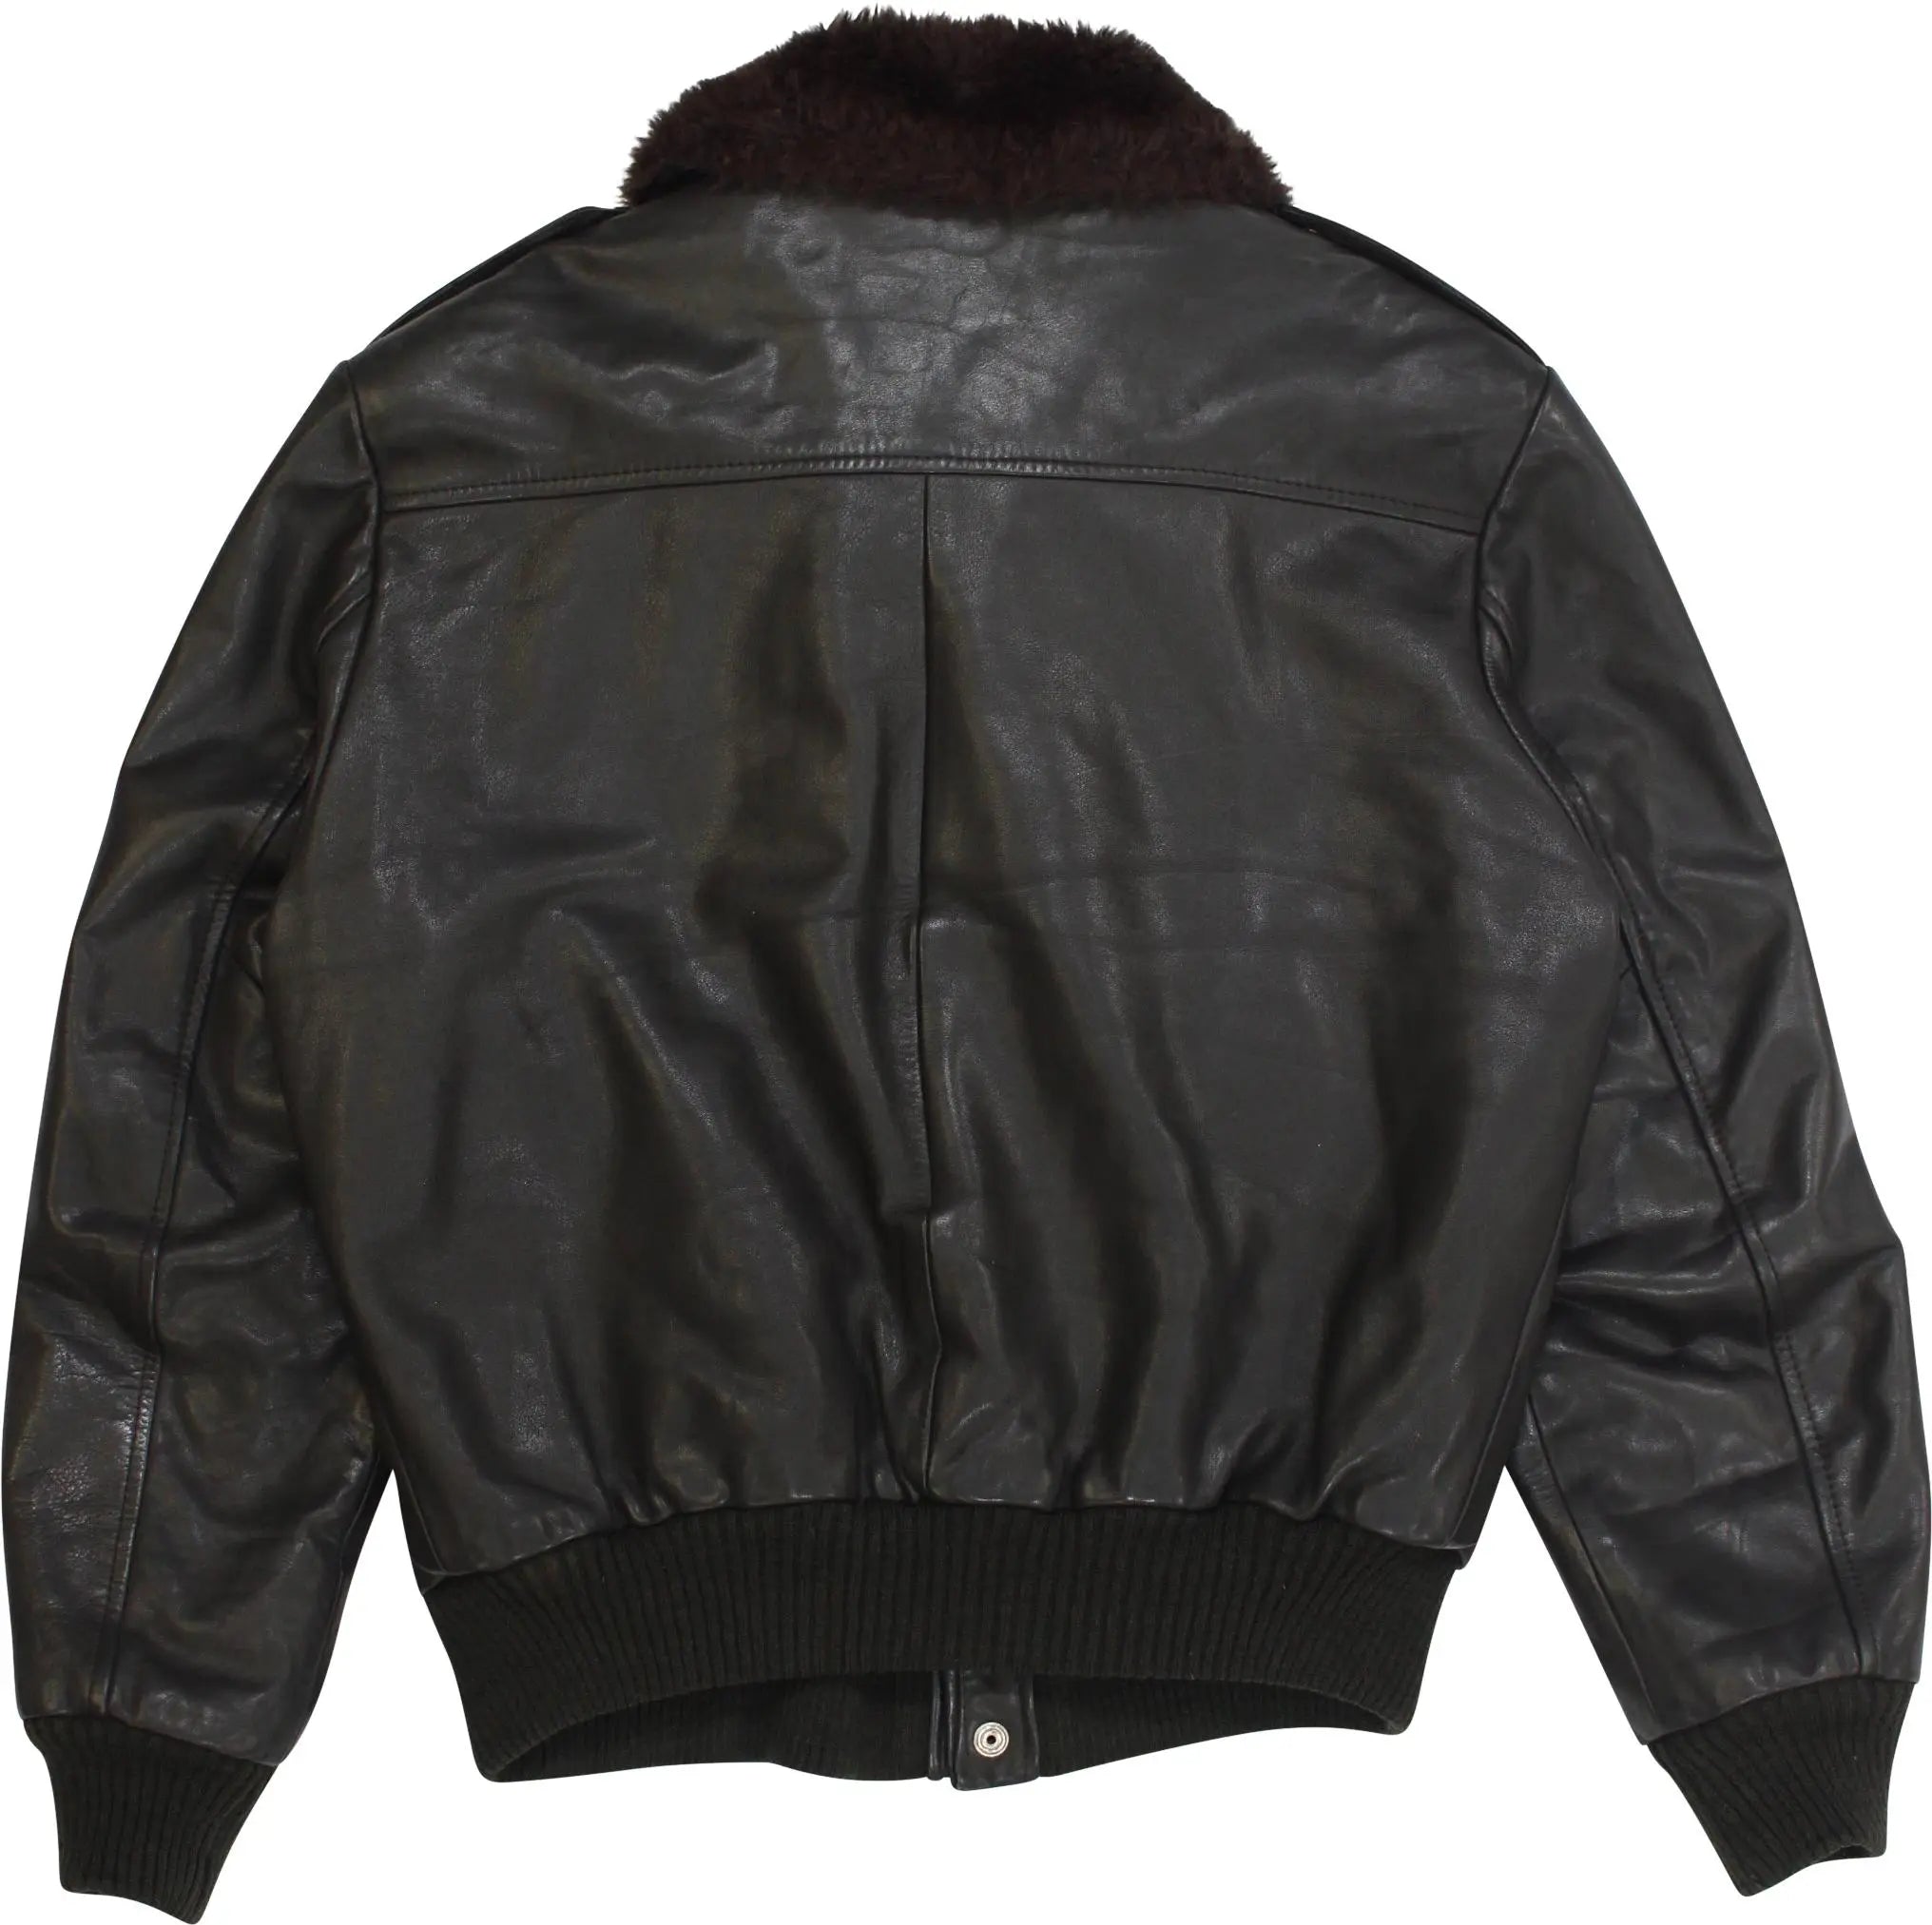 William Barry - 70s/80s William Barry Vintage Leather Flight Jacket- ThriftTale.com - Vintage and second handclothing